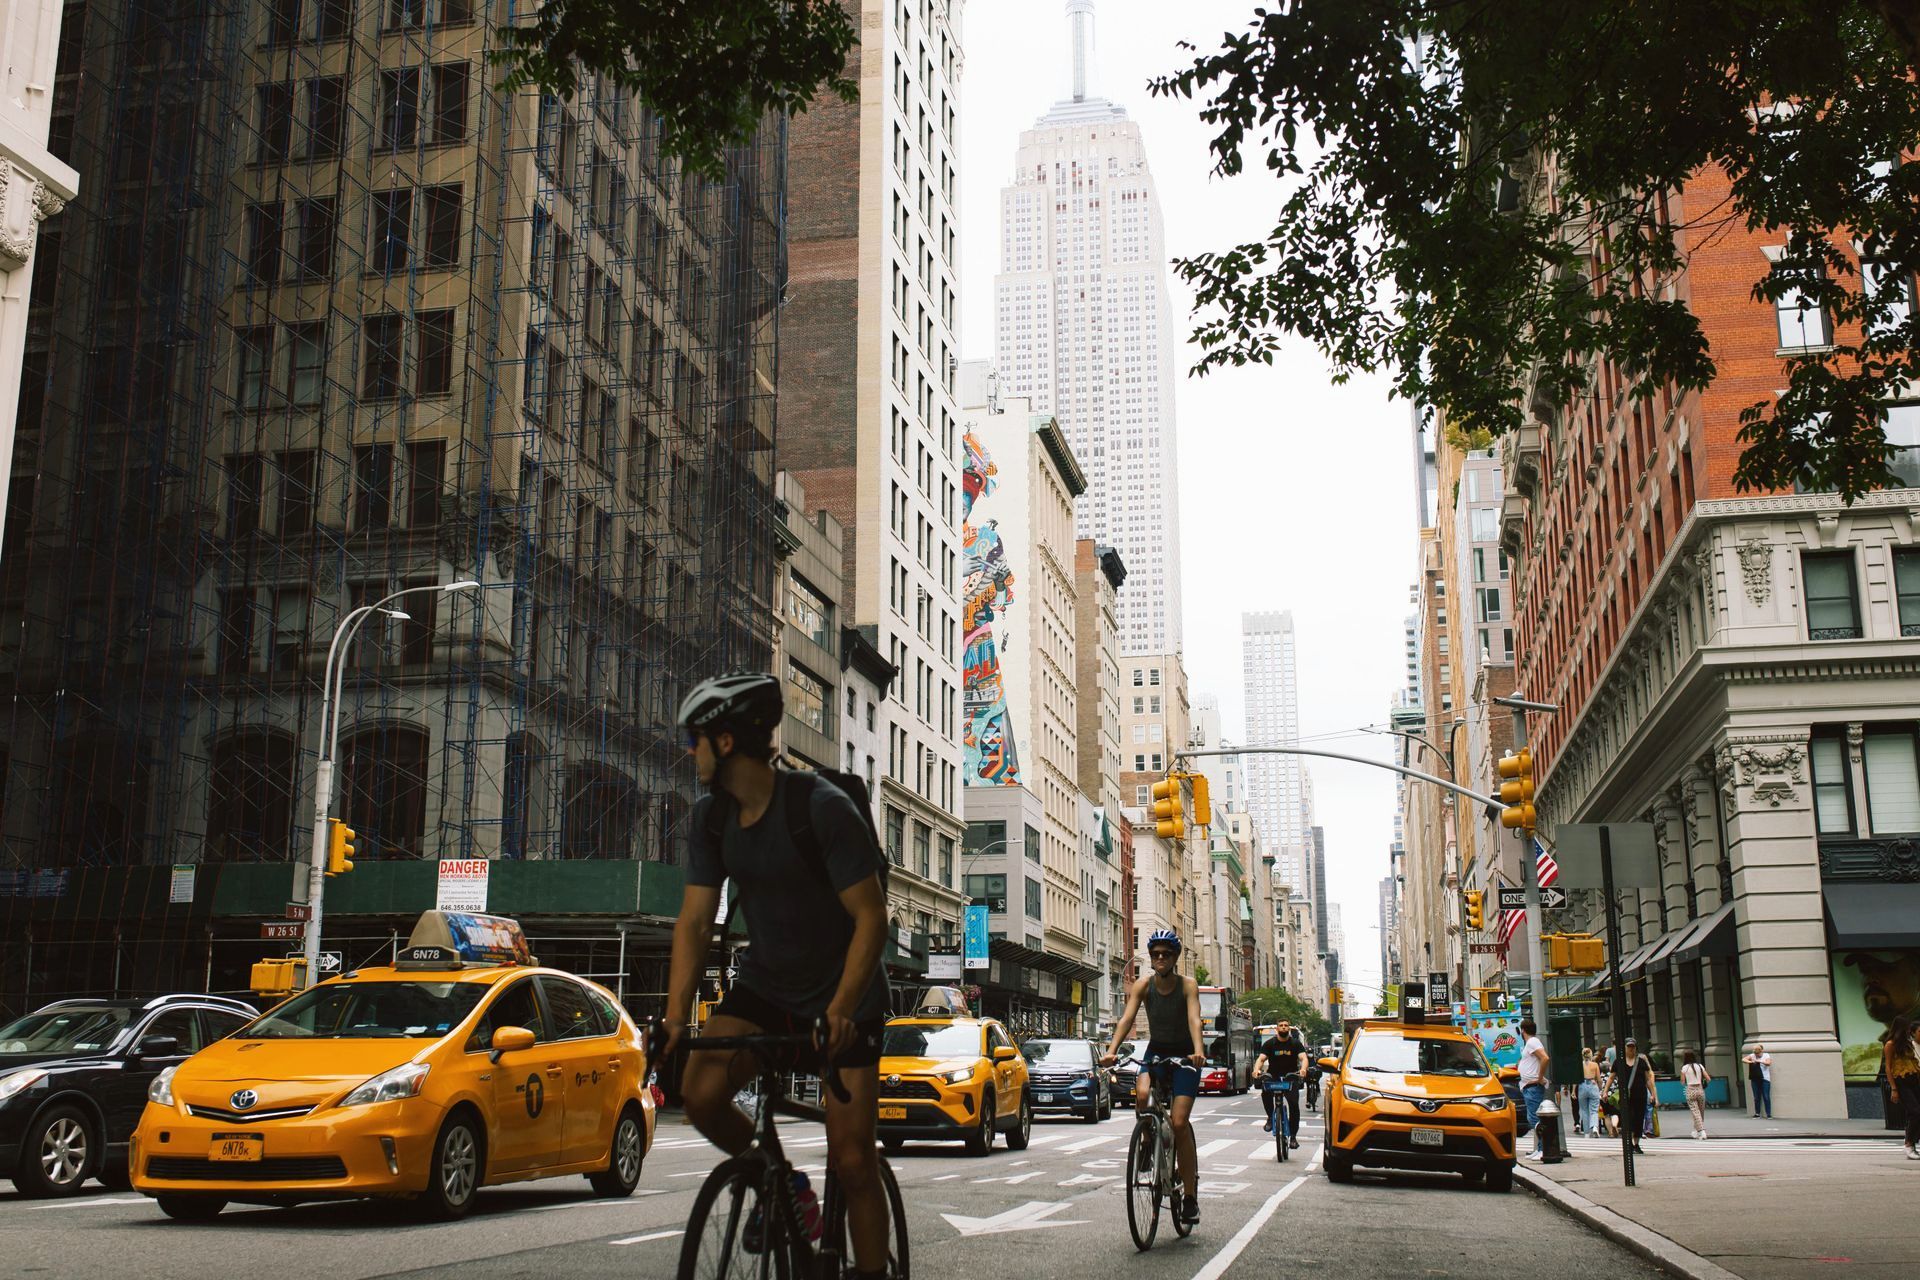 NYC Fifth Ave. with traffic and bicycle riders